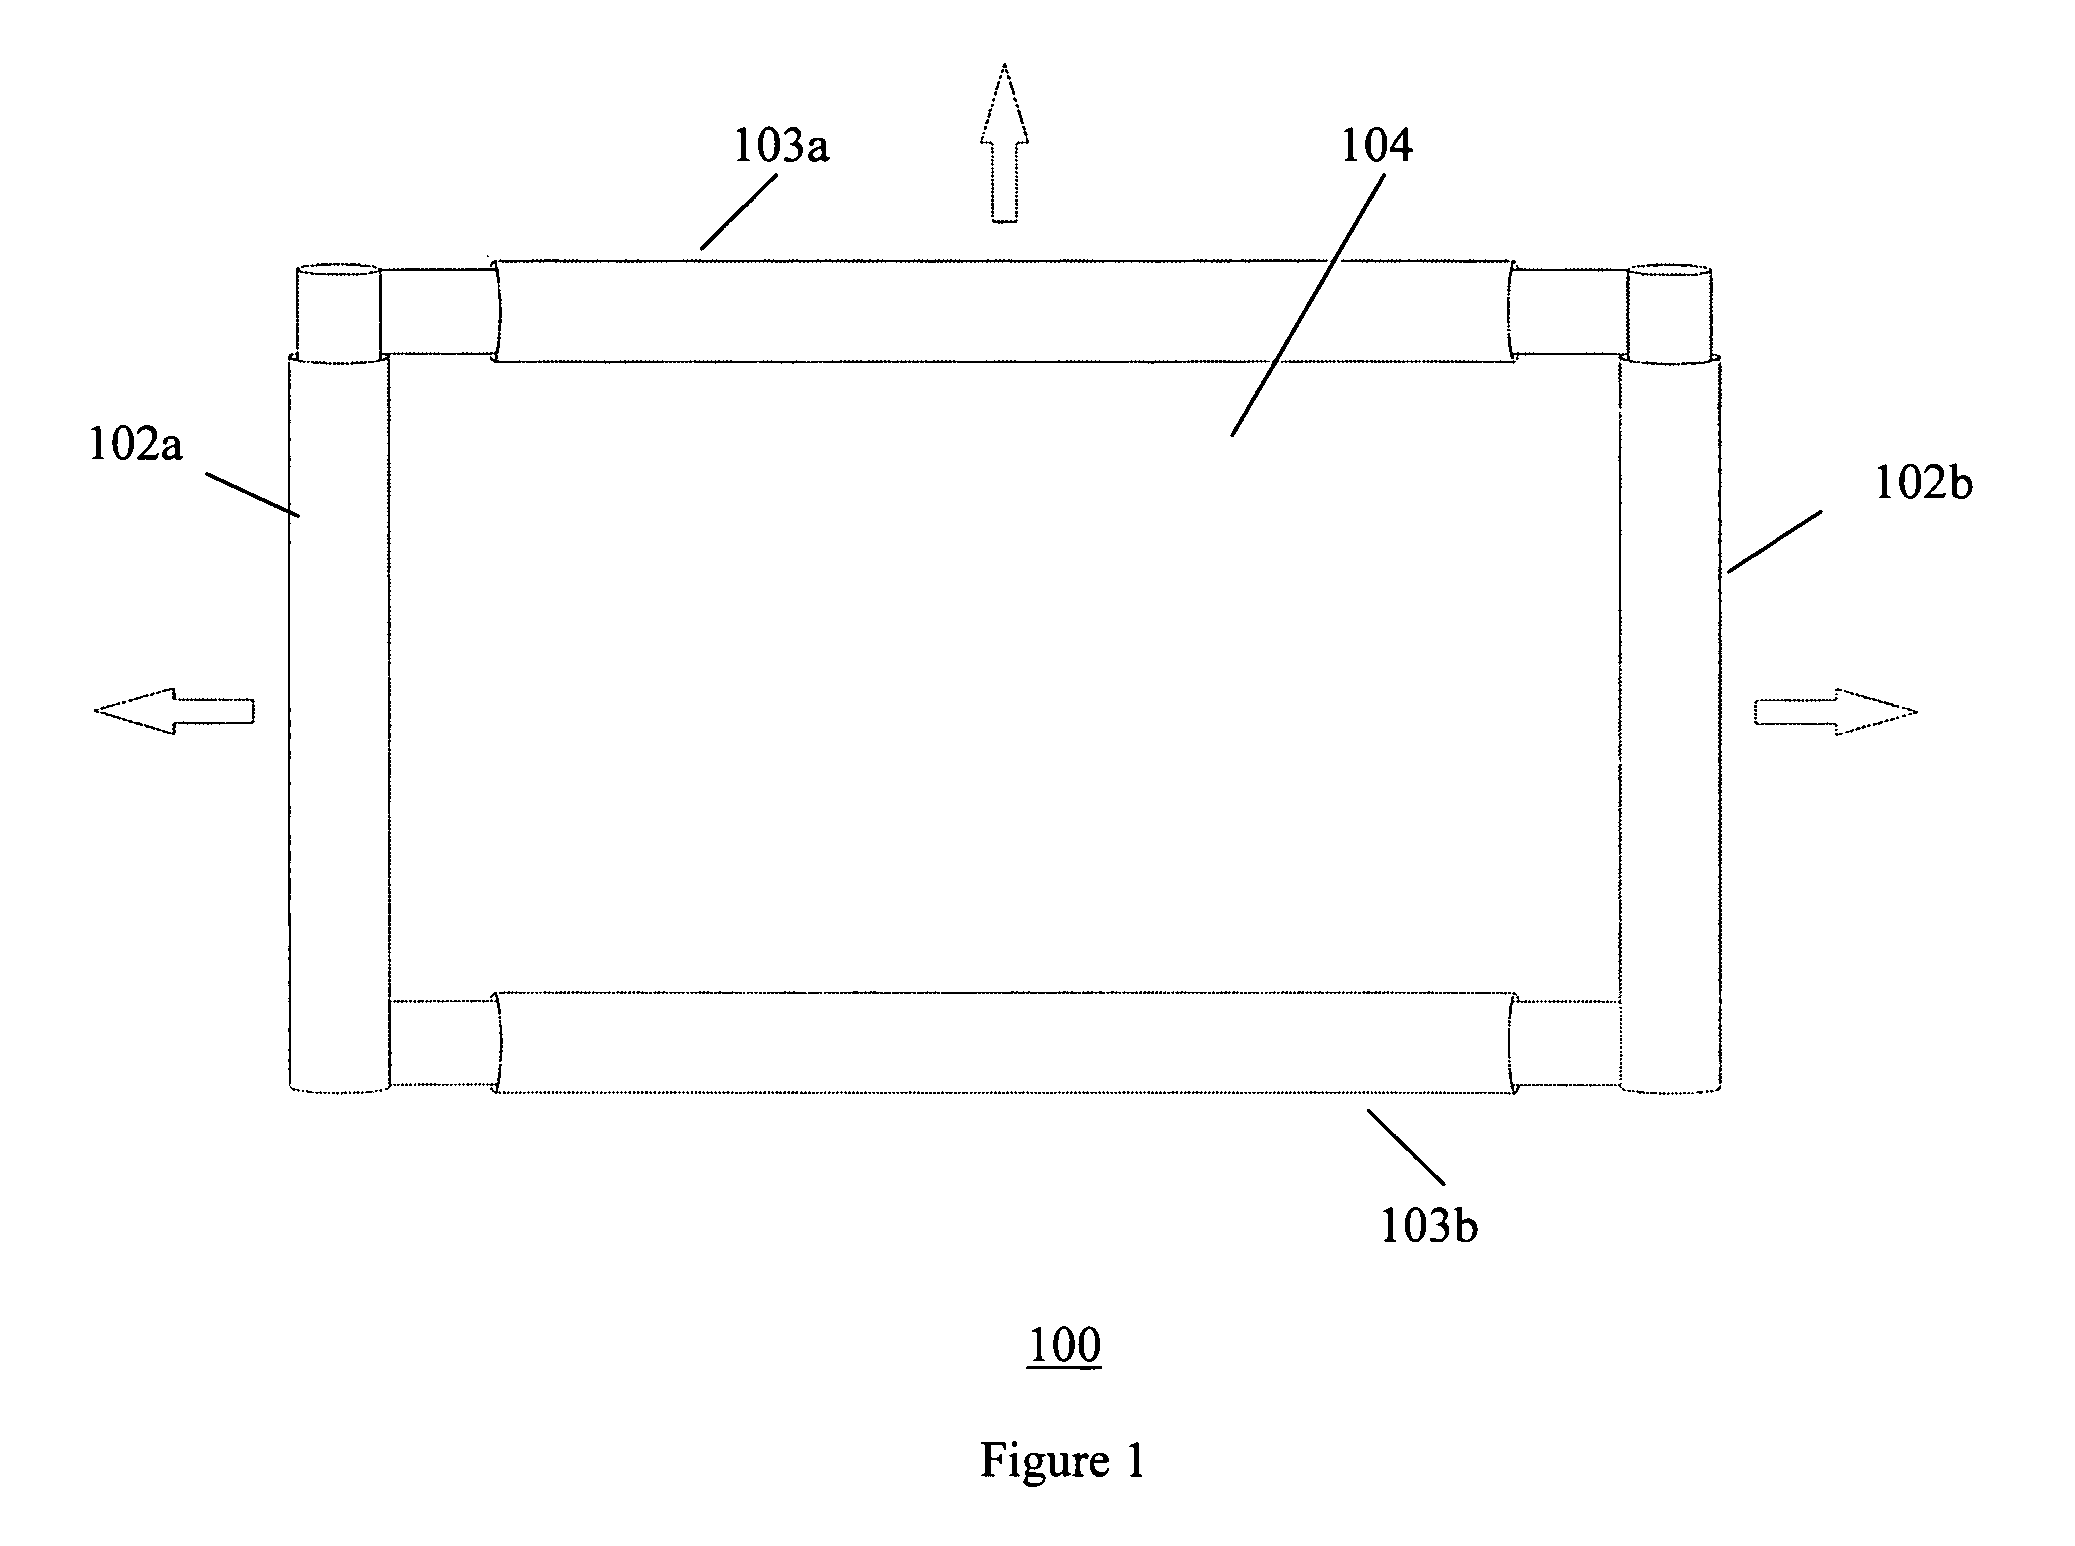 Expandable display having rollable material